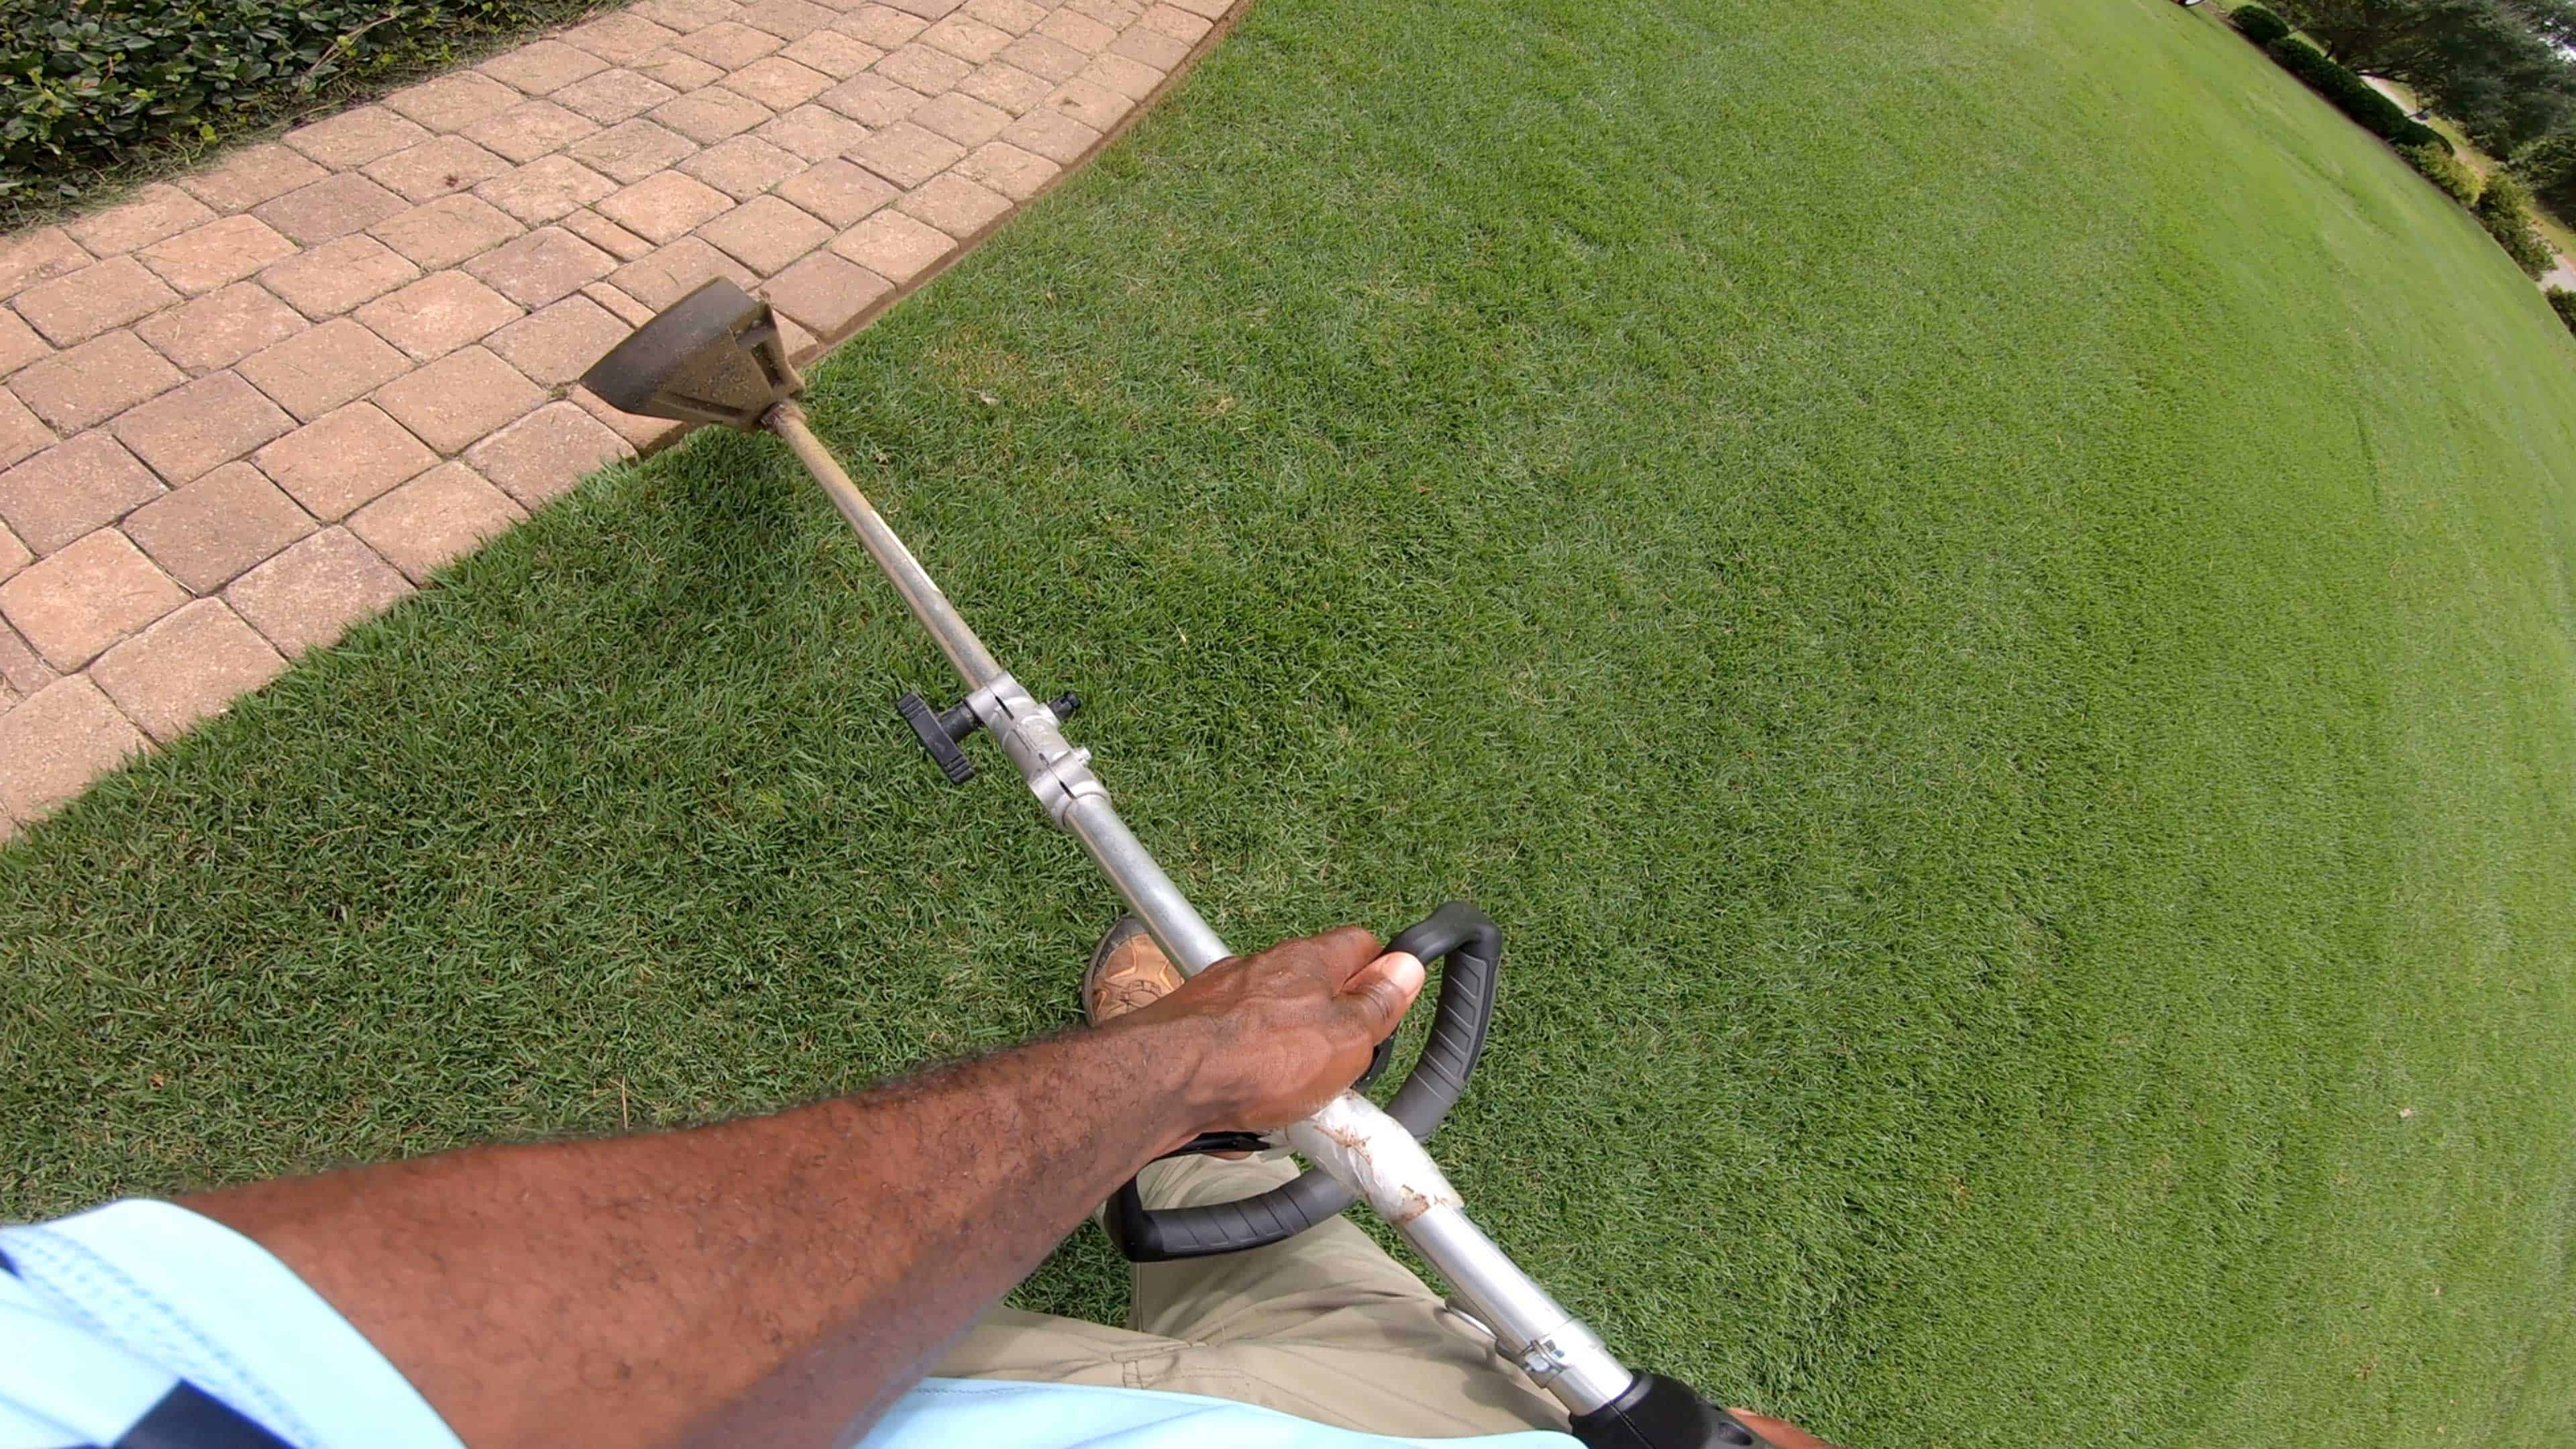 Edging Tip: A string trimmer is the most versatile tool for precise lawn edging